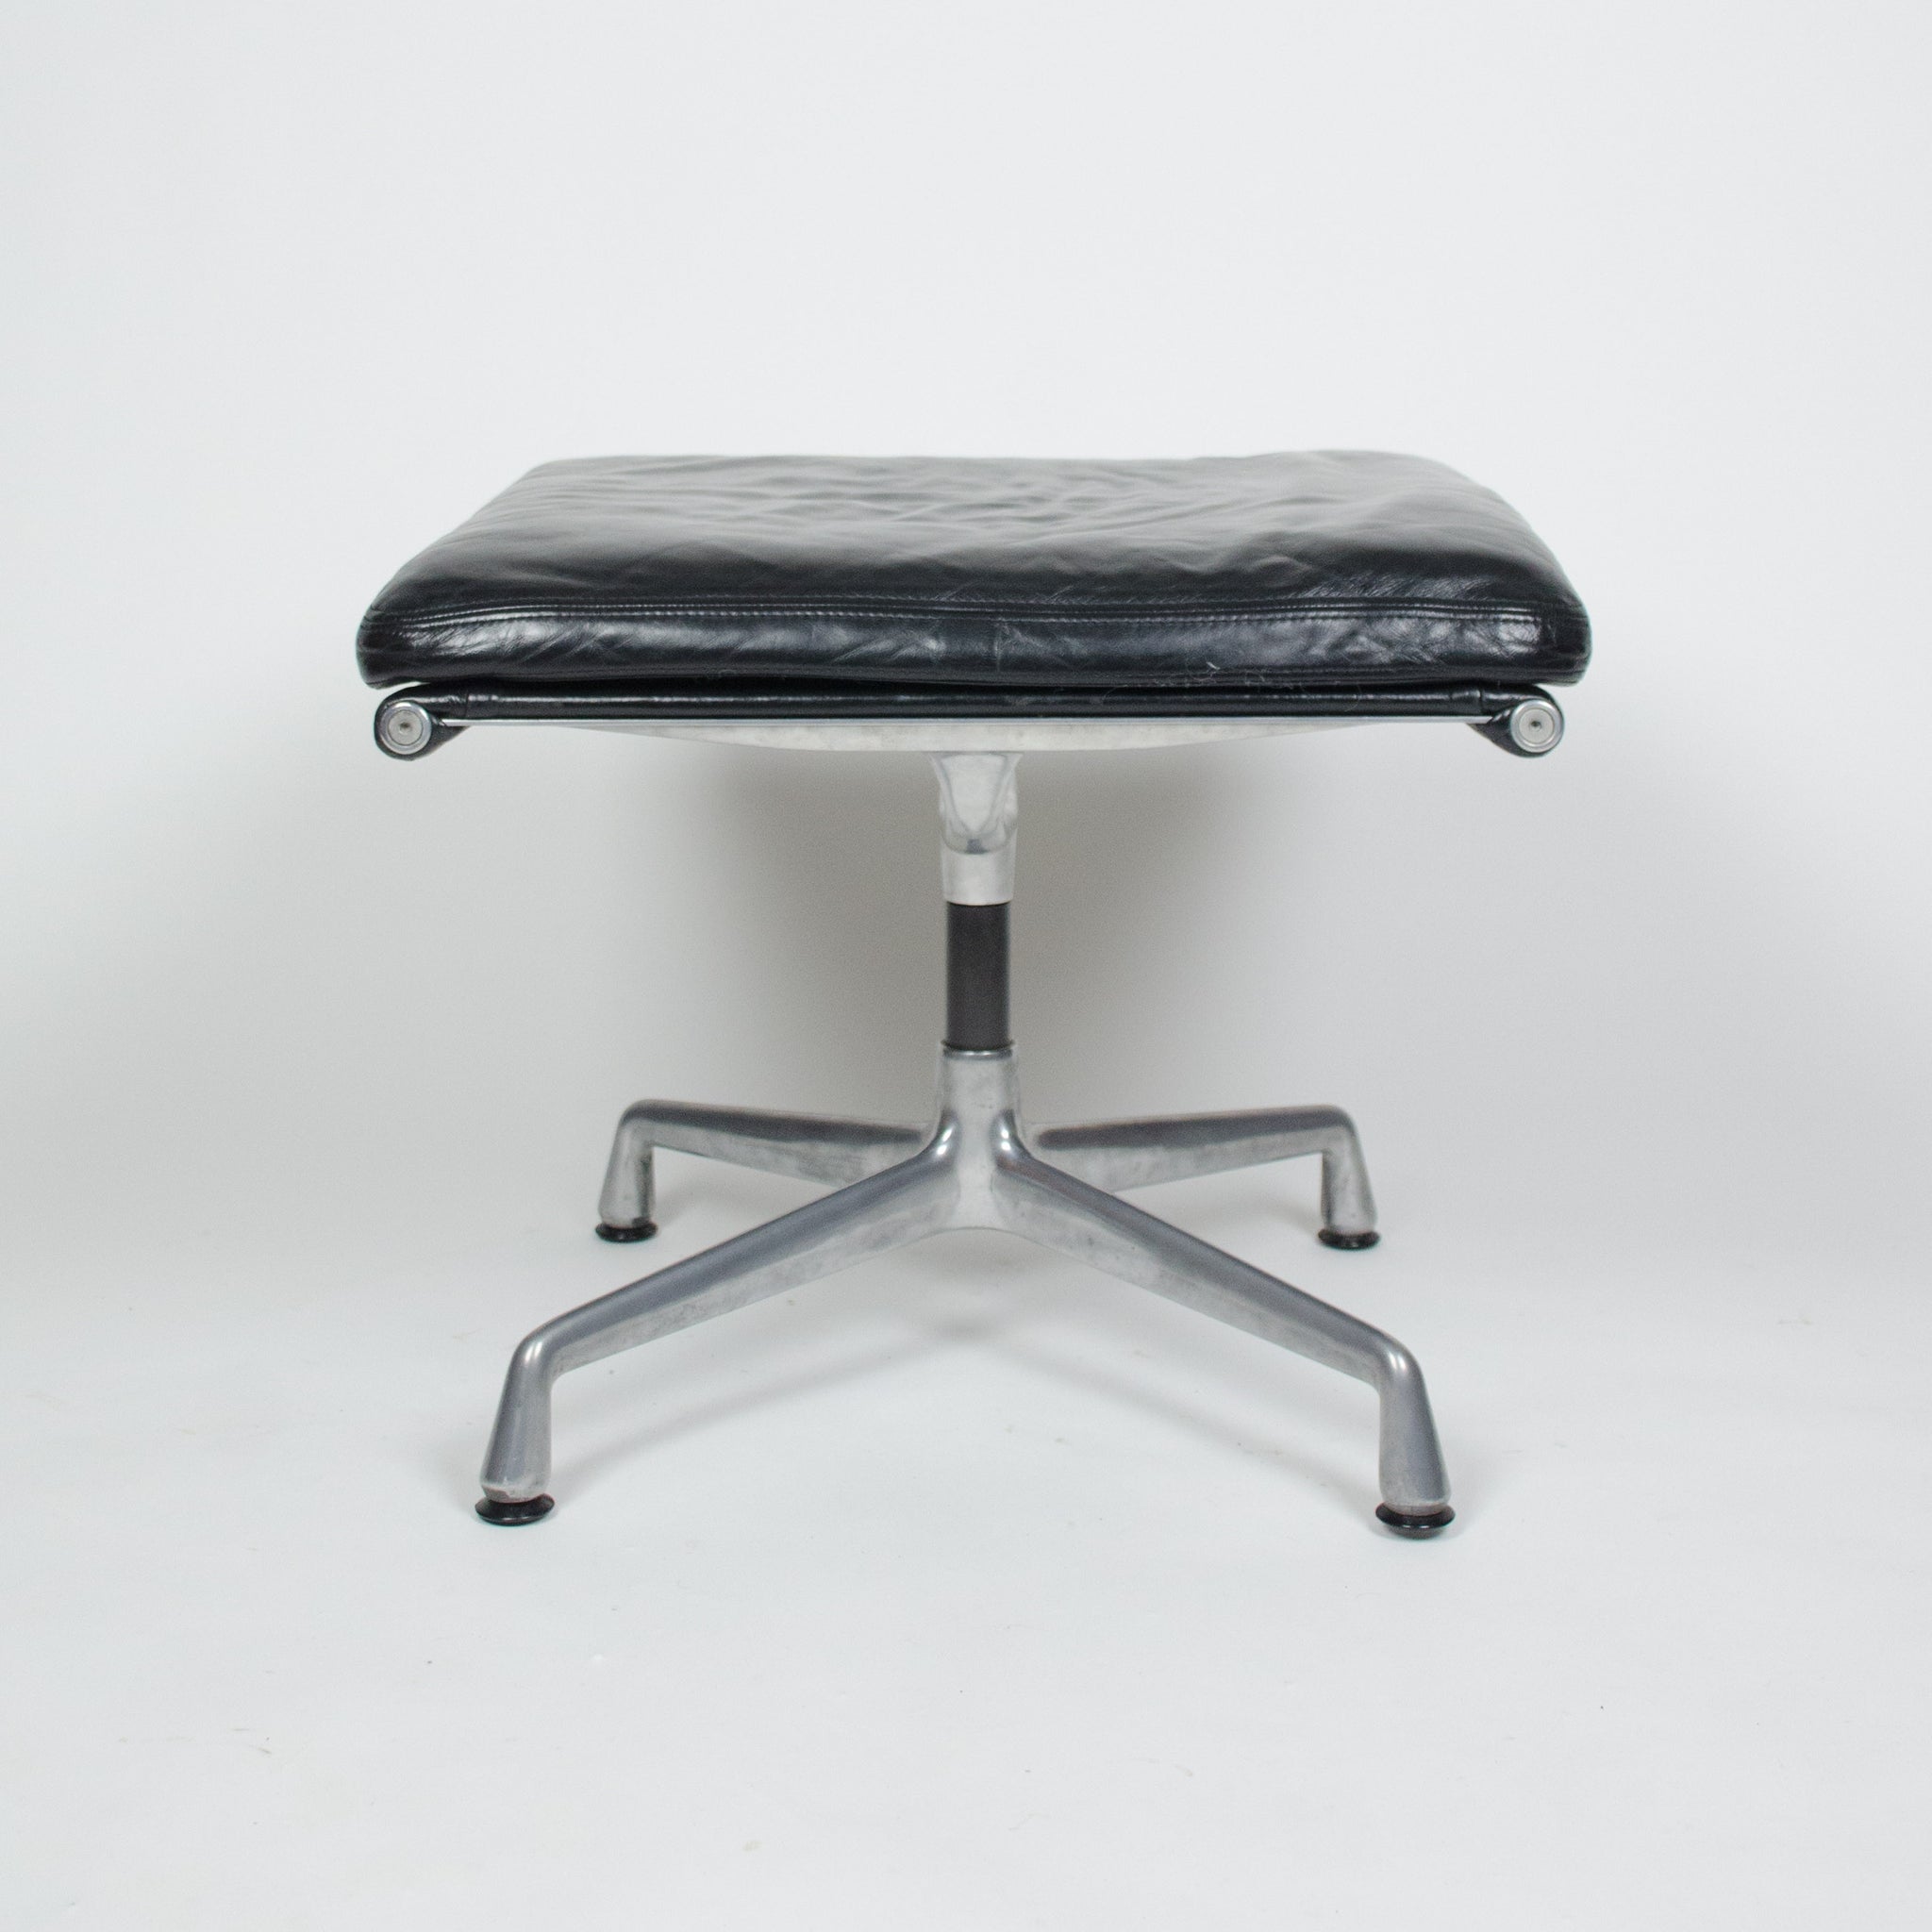 SOLD Eames Herman Miller Soft Pad Lounge Chair with Ottoman Black